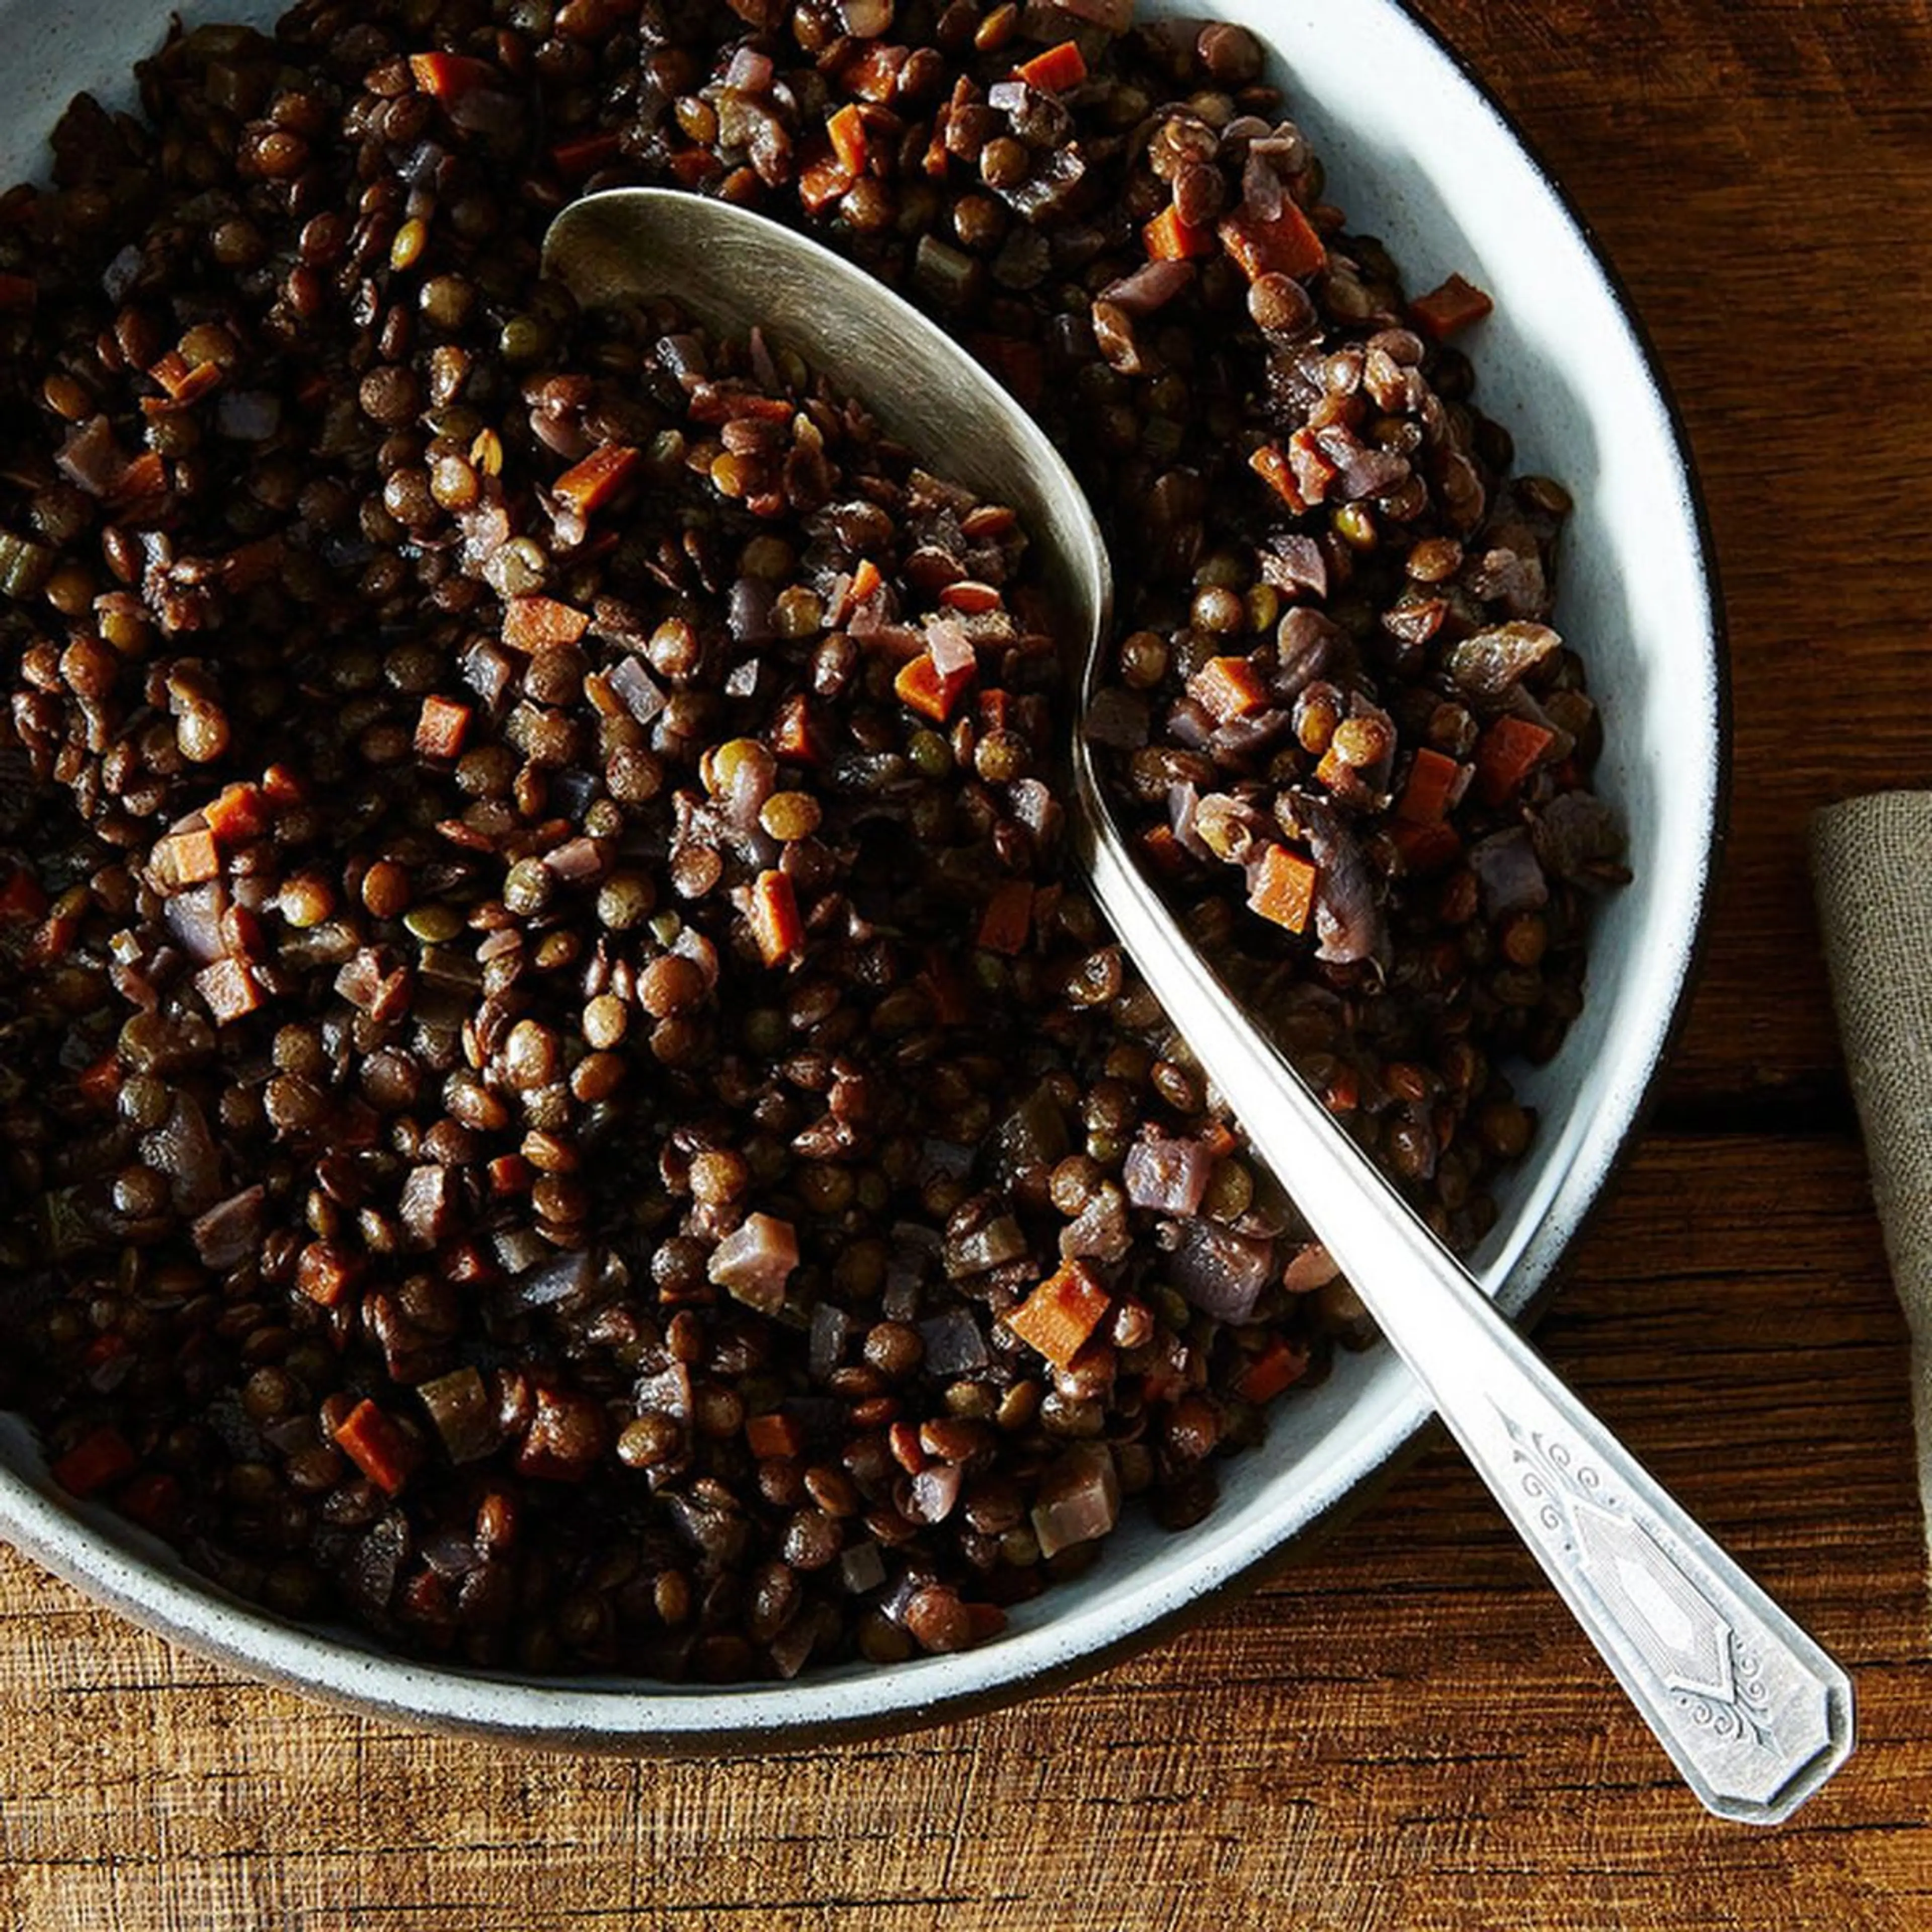 Judy Rodgers' Lentils Braised in Red Wine